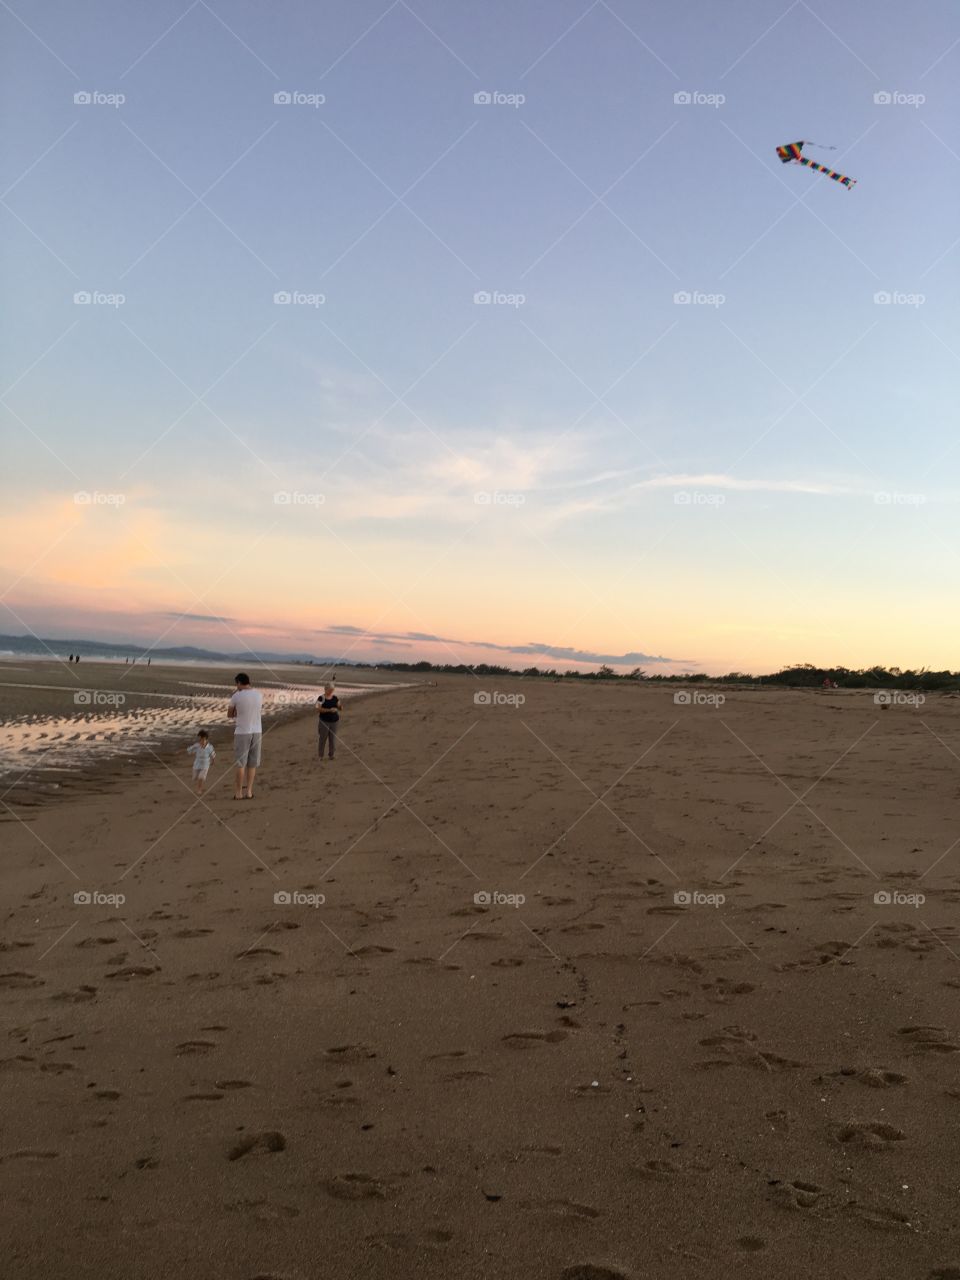 What a lovely afternoon at the beach for this family flying a kite. The little boy with them was having a blast. Photo taken with permission. 